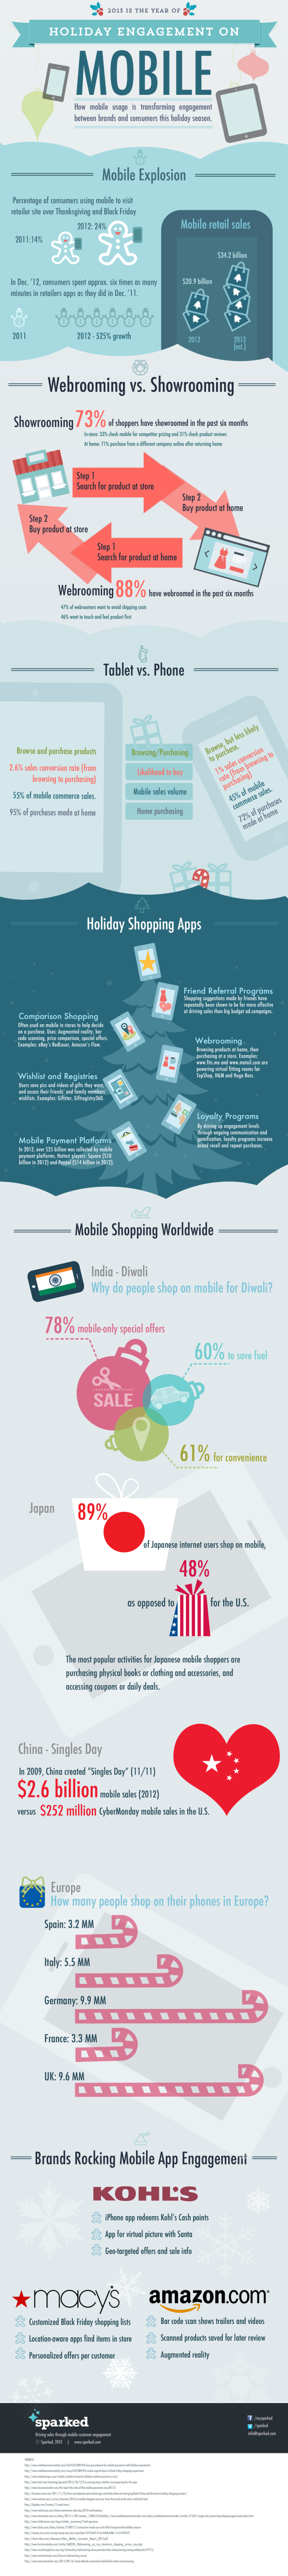 2013-holiday-mobile-infographic-640x5734